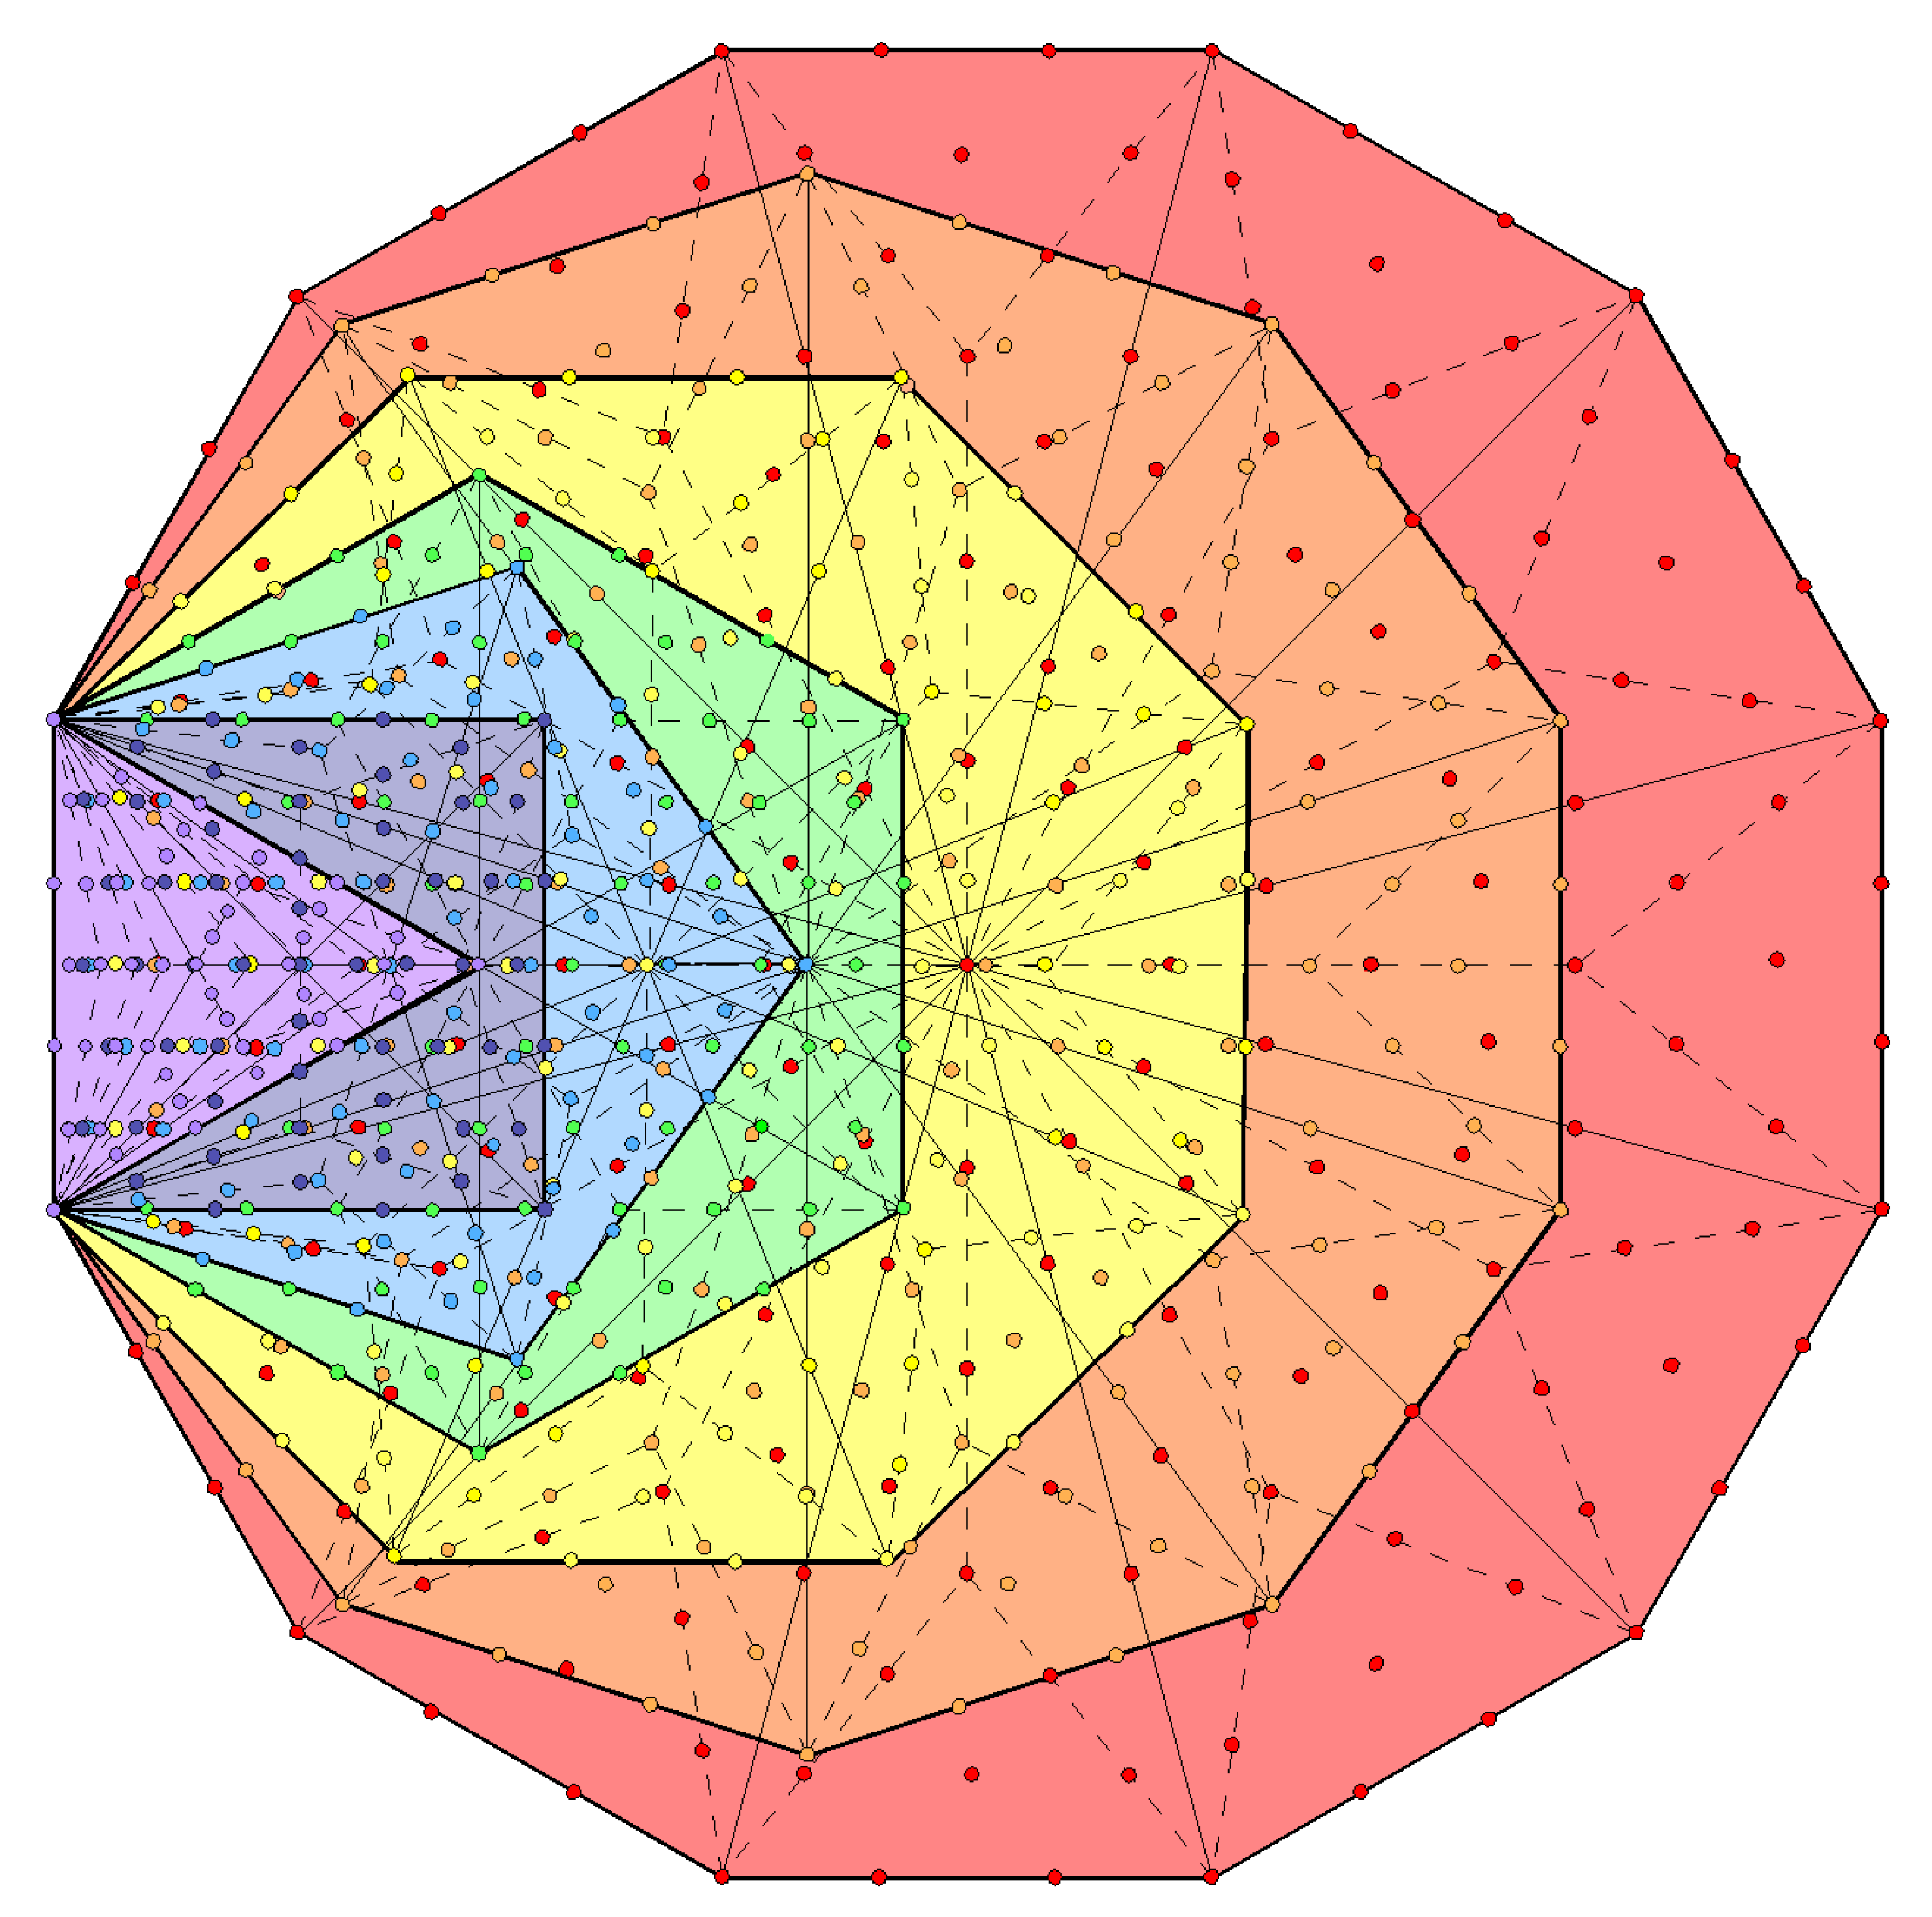 687 yods in 7 enfolded Type B polygons